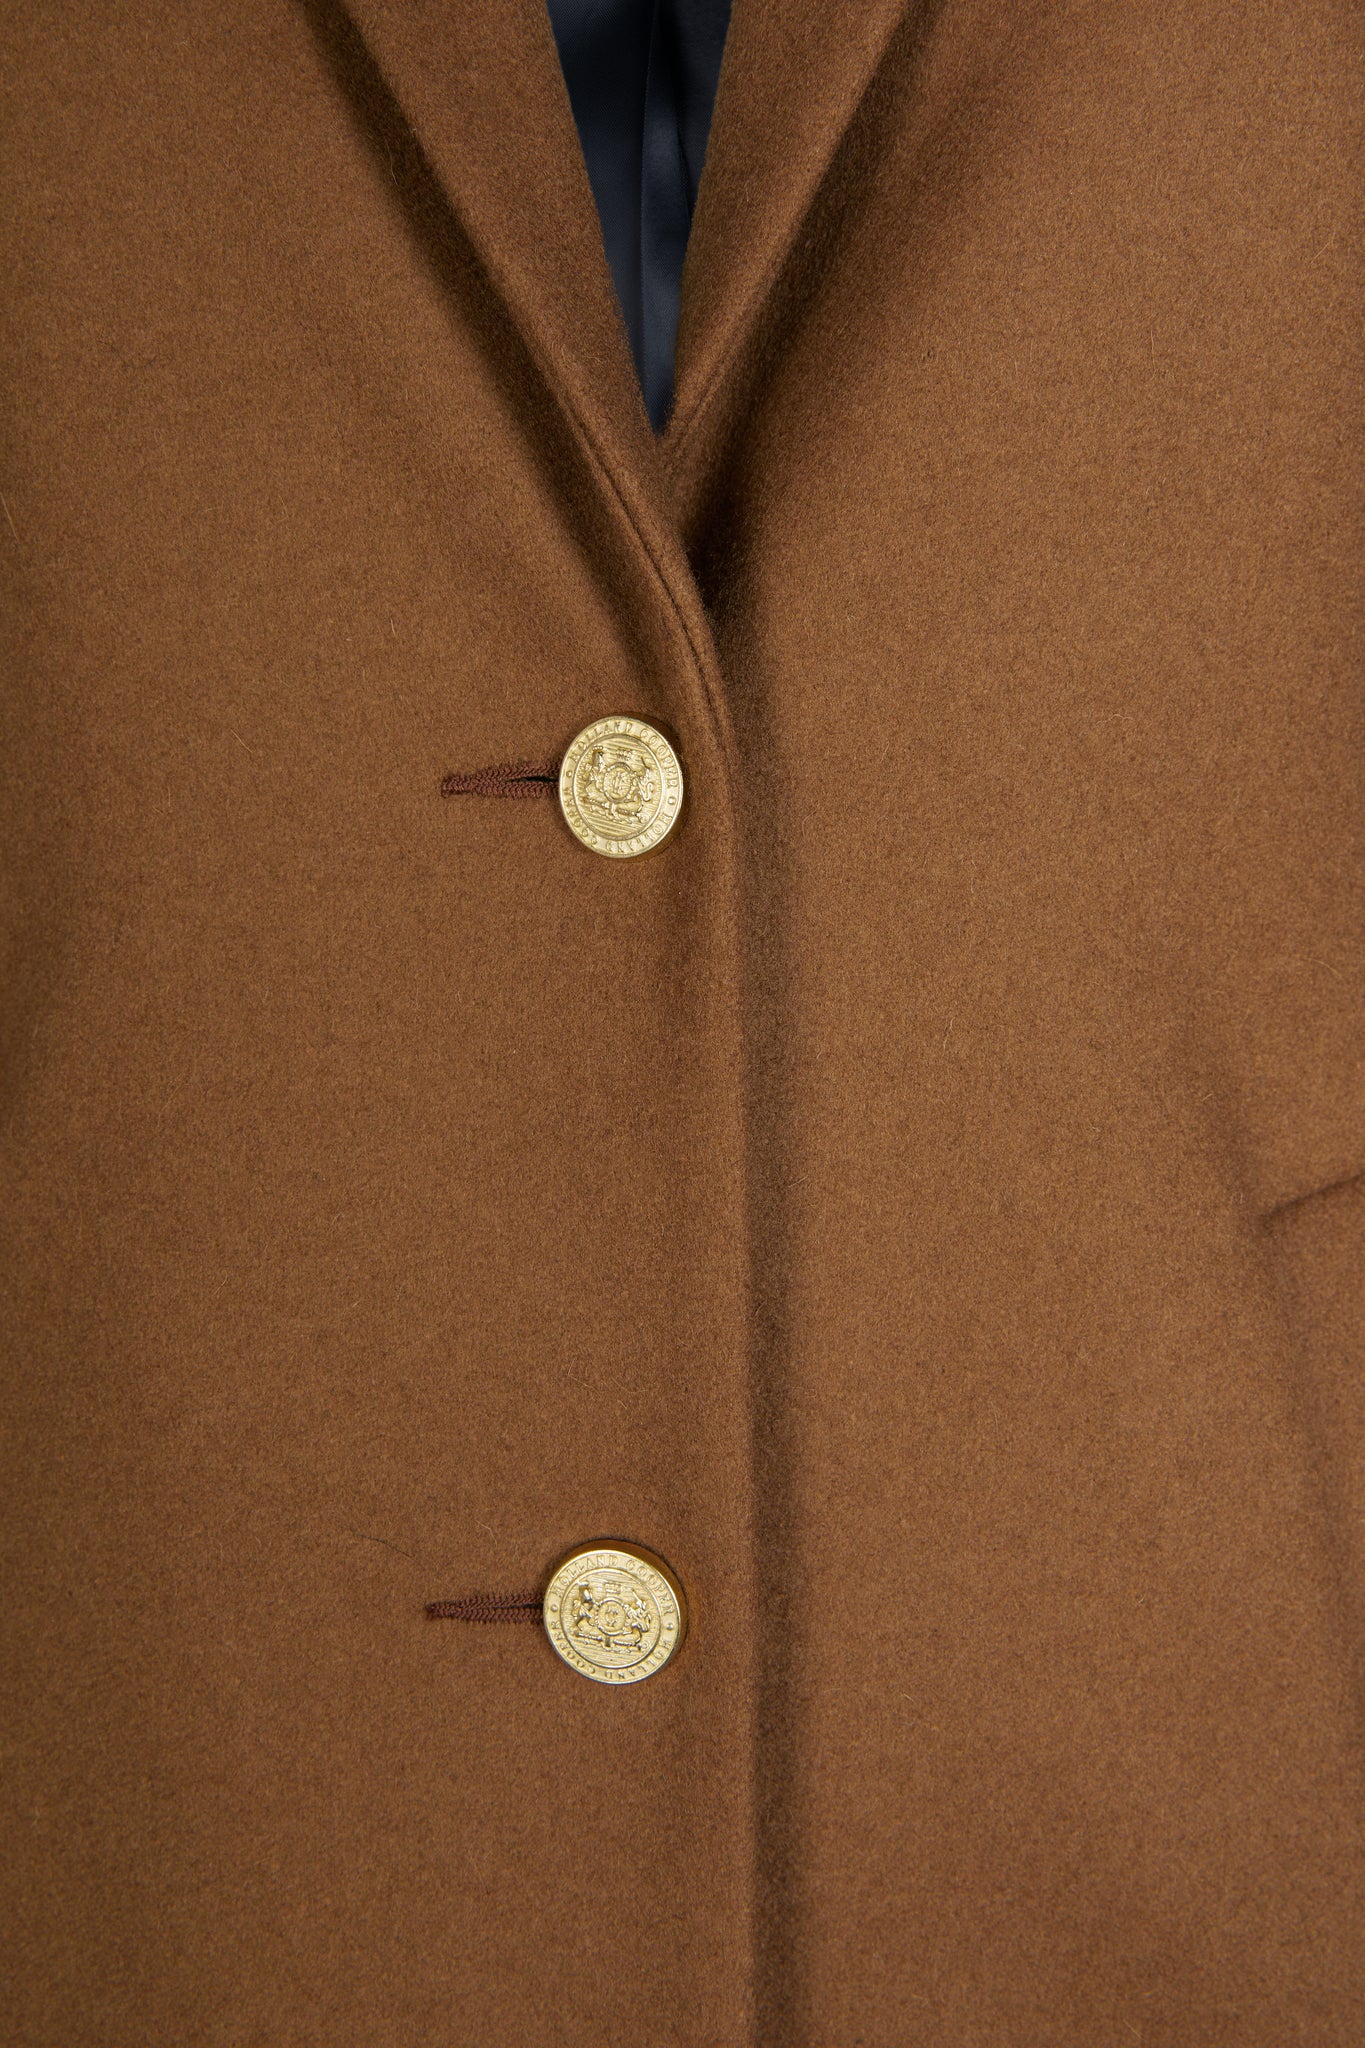 gold button detail of womens dark camel single breasted full length wool coat